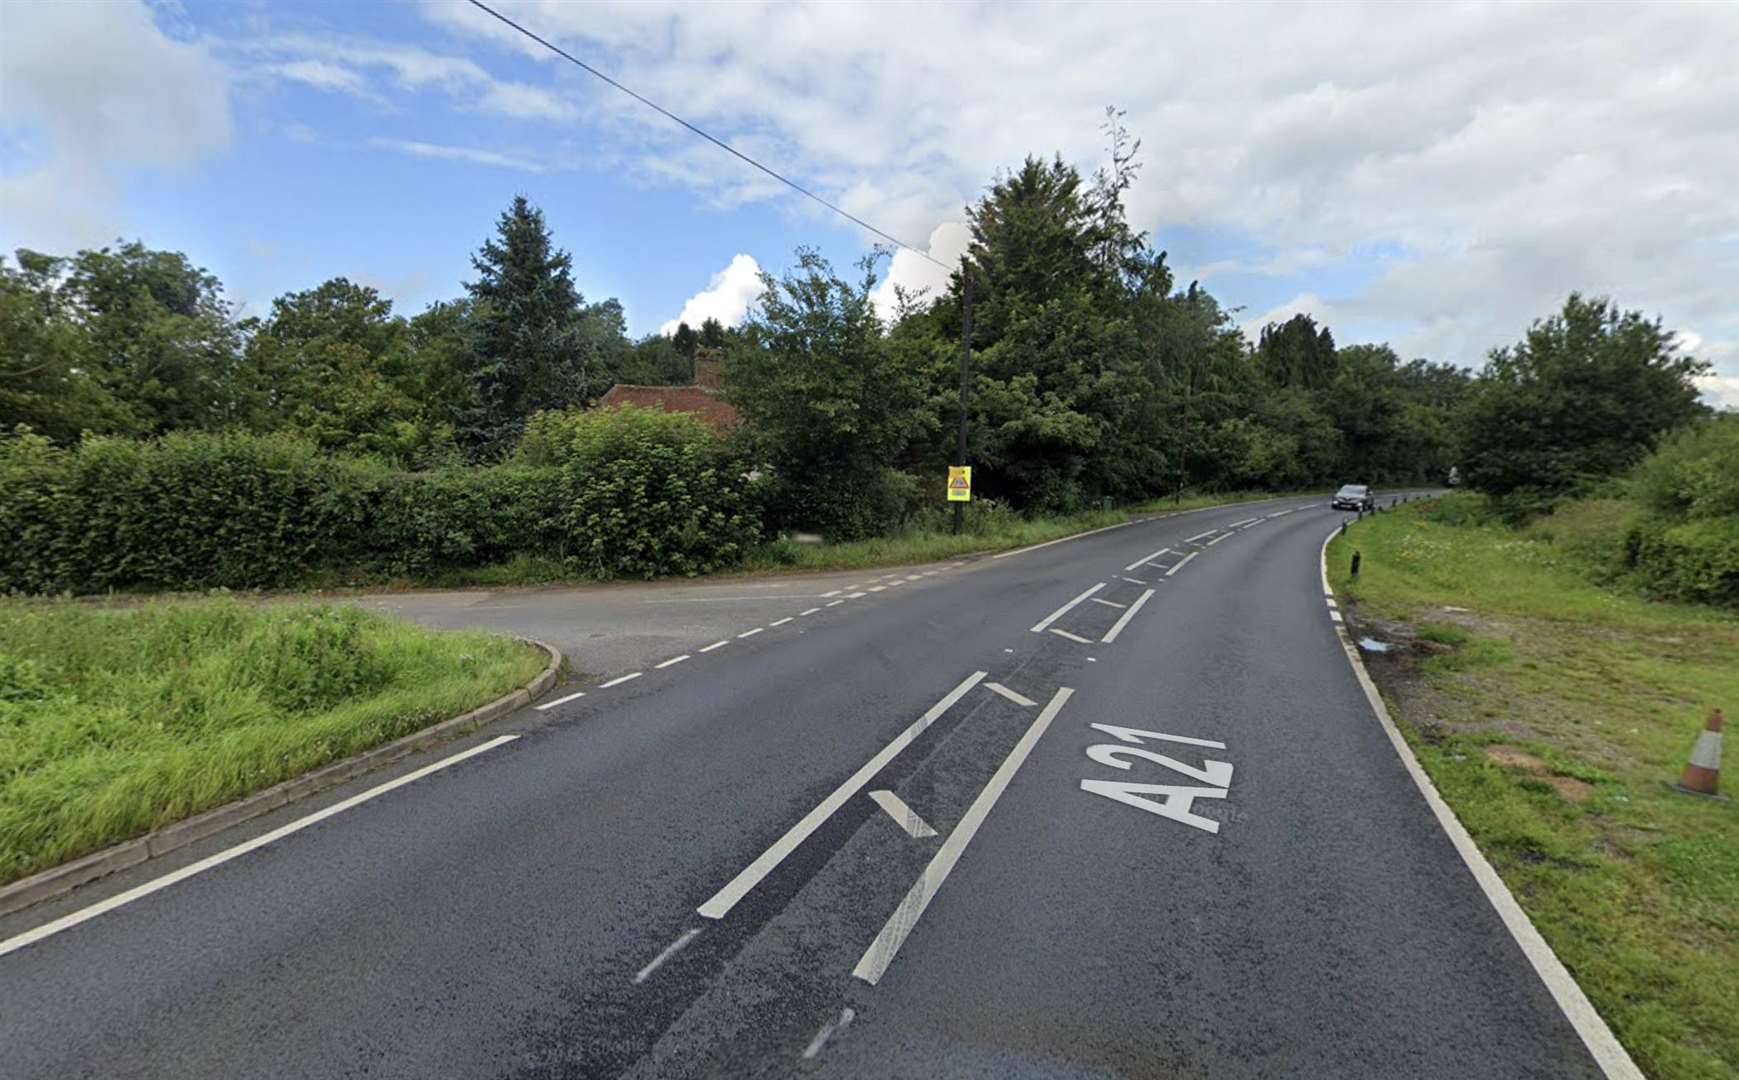 The crash took place on the A21 between Lamberhurst and Flimwell, at the junction with Rosemary Lane. Picture: Google Maps